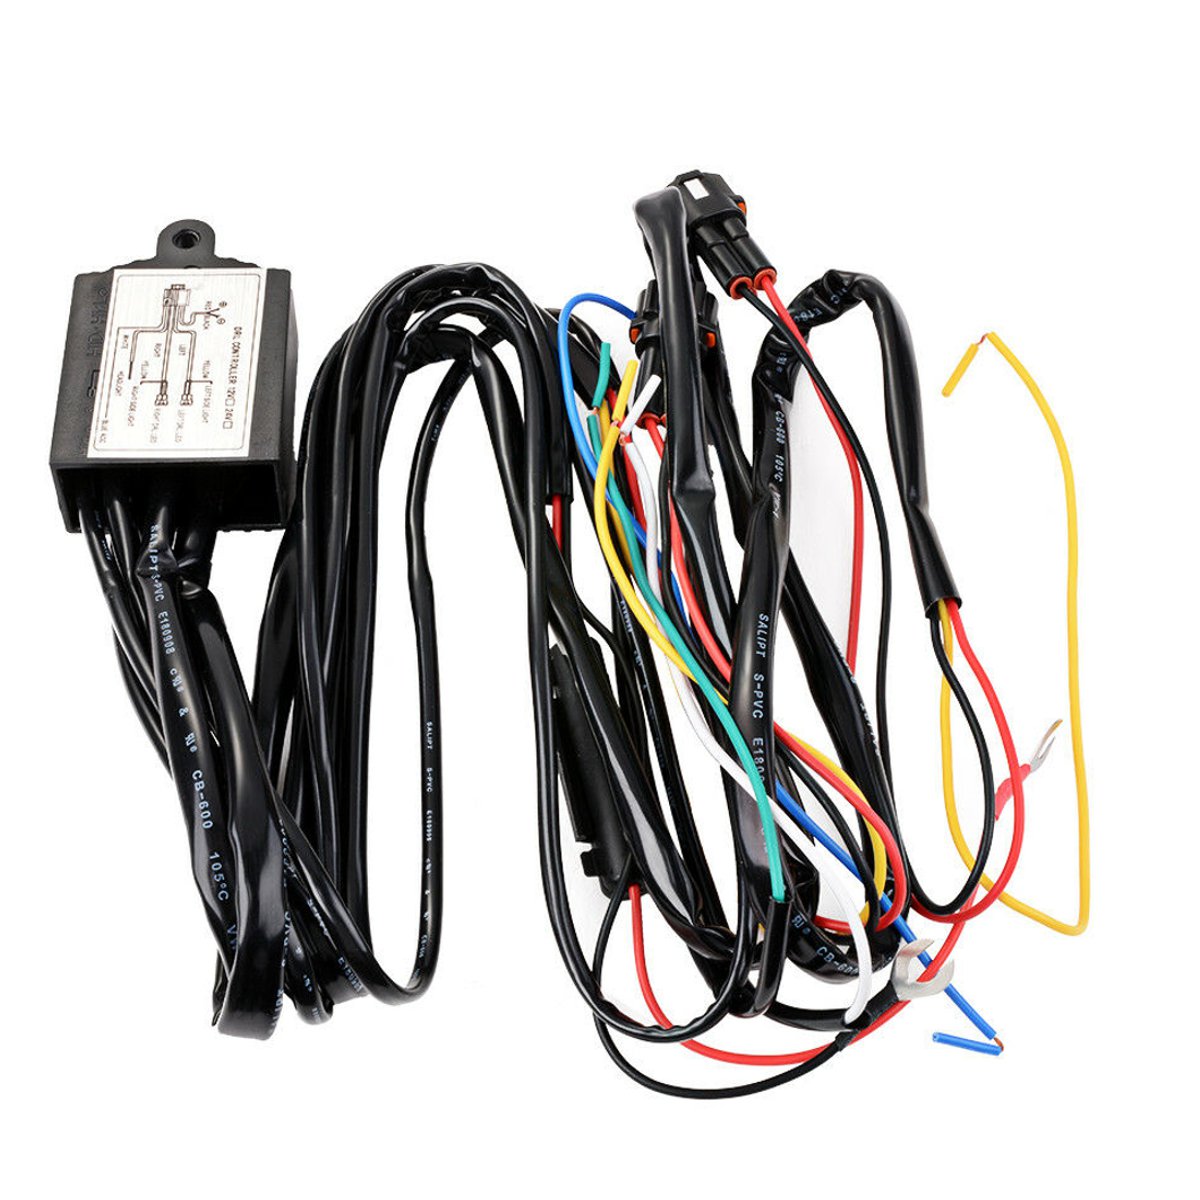 

12V DRL Dimmer LED Dimming Relay Daytime Running Light Car On/Off Switch Harness With Flash Turn Signal Delay Function